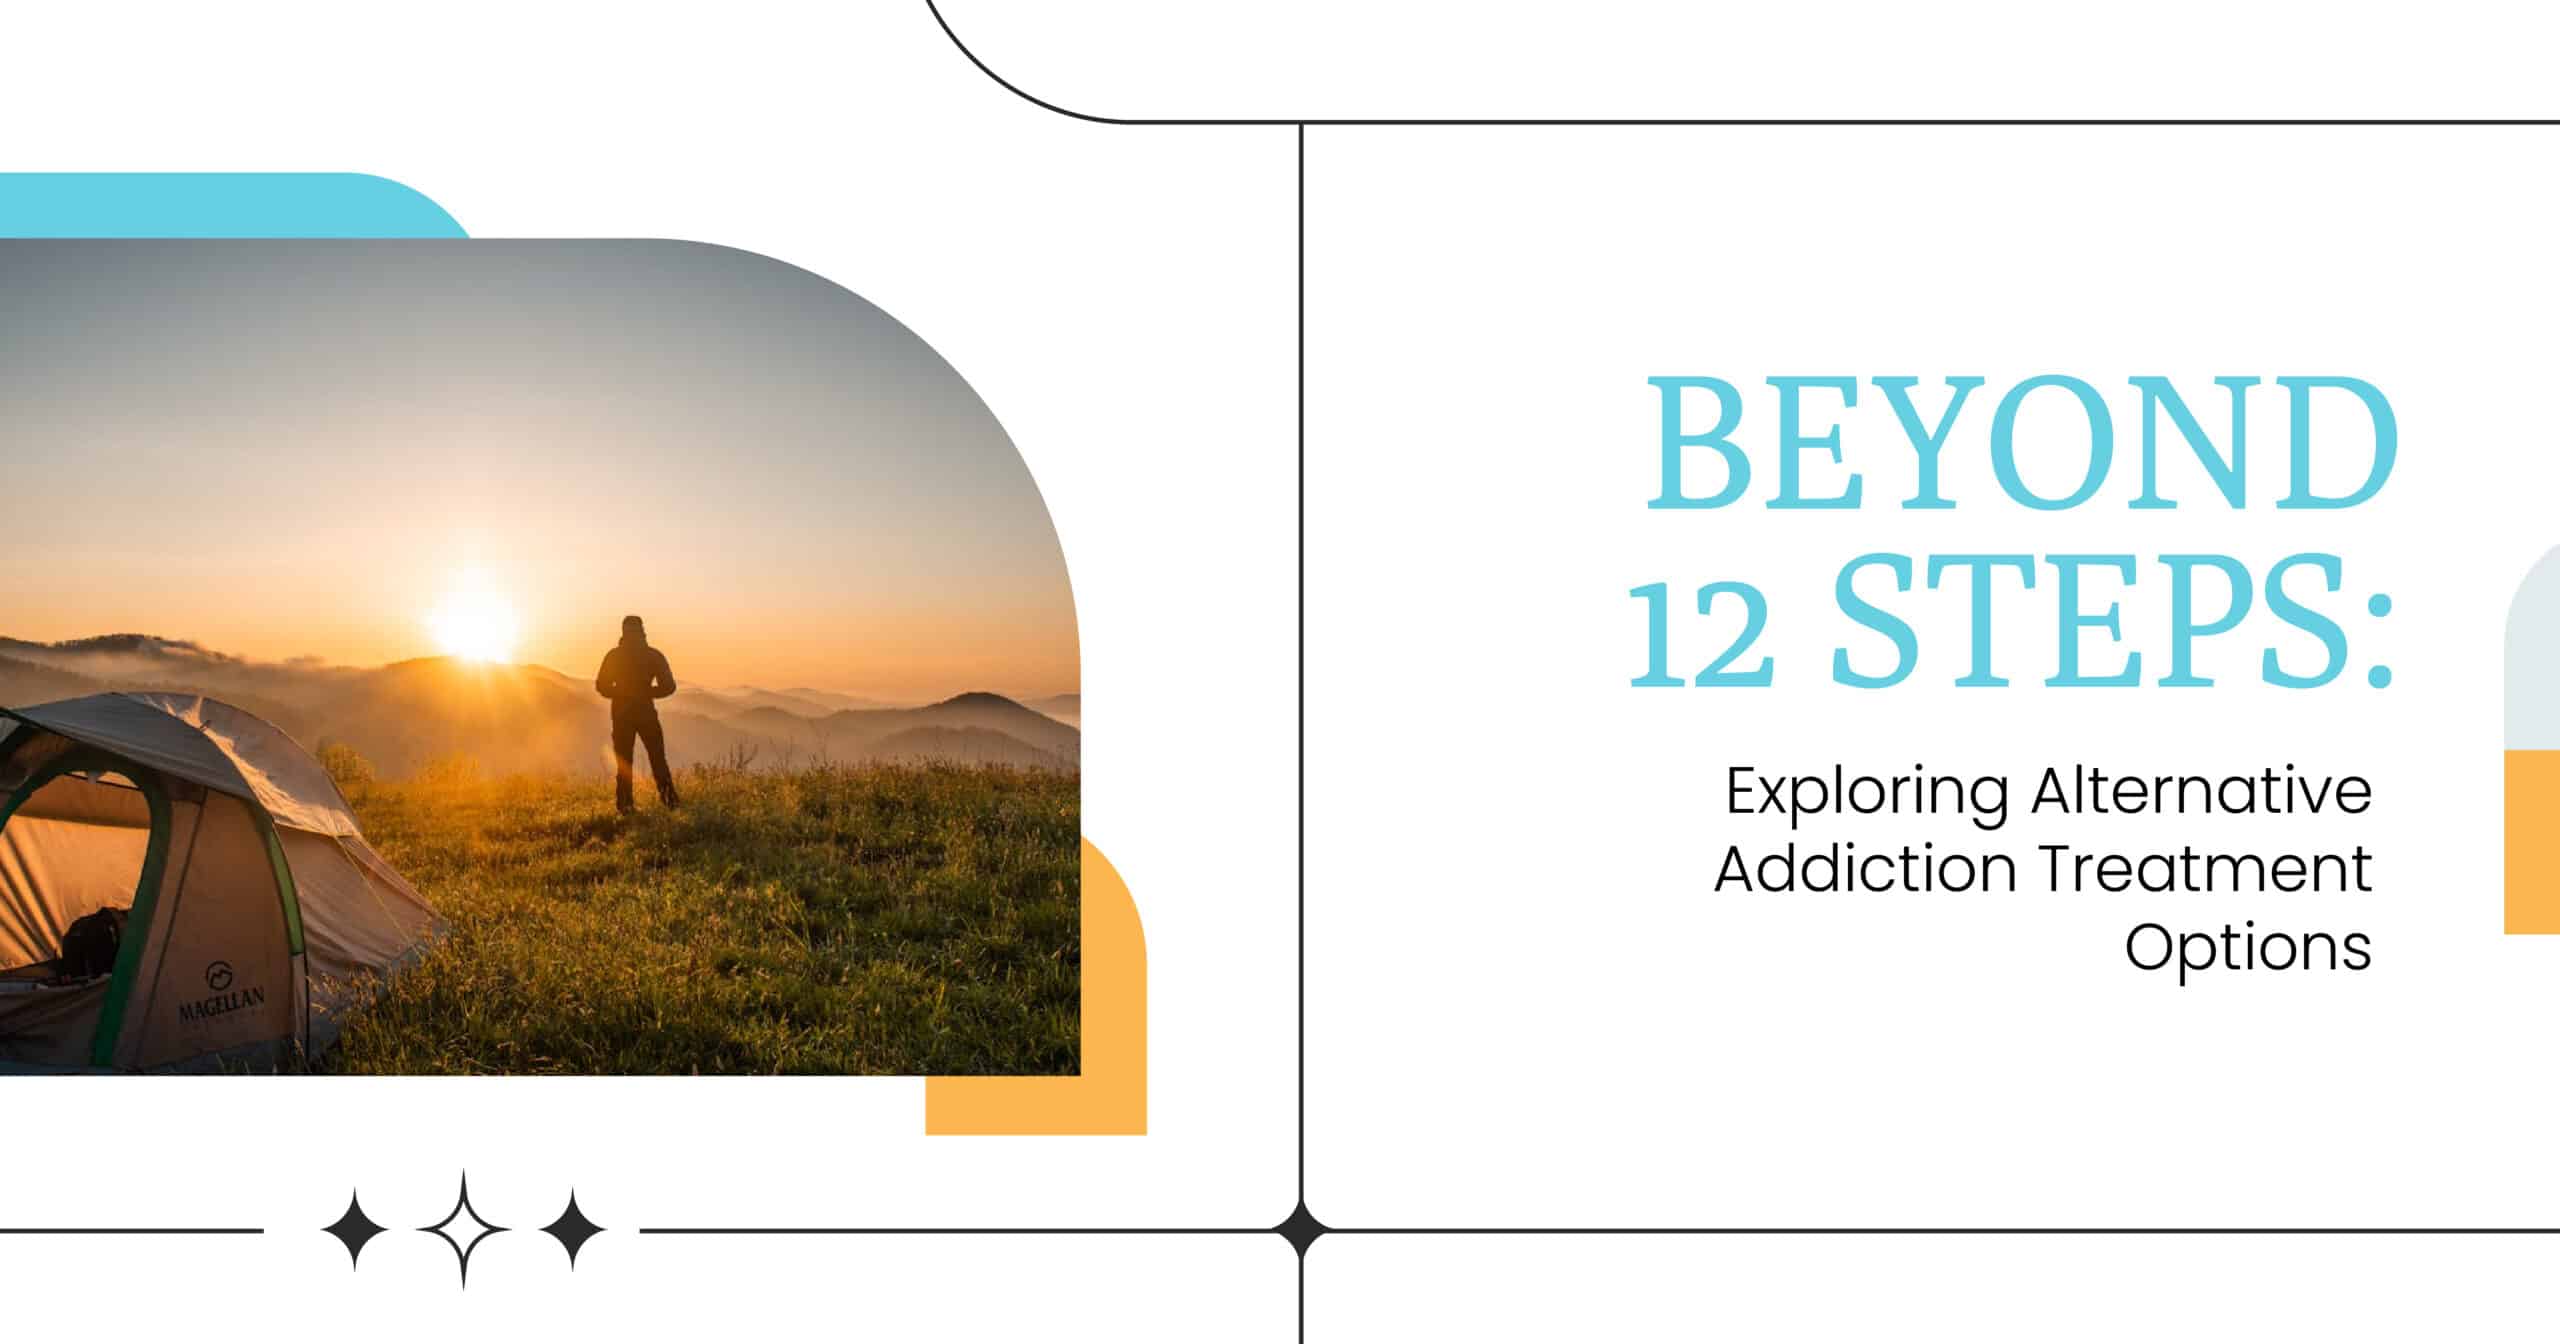 Alternative Addiction Treatment Options to the 12 Steps